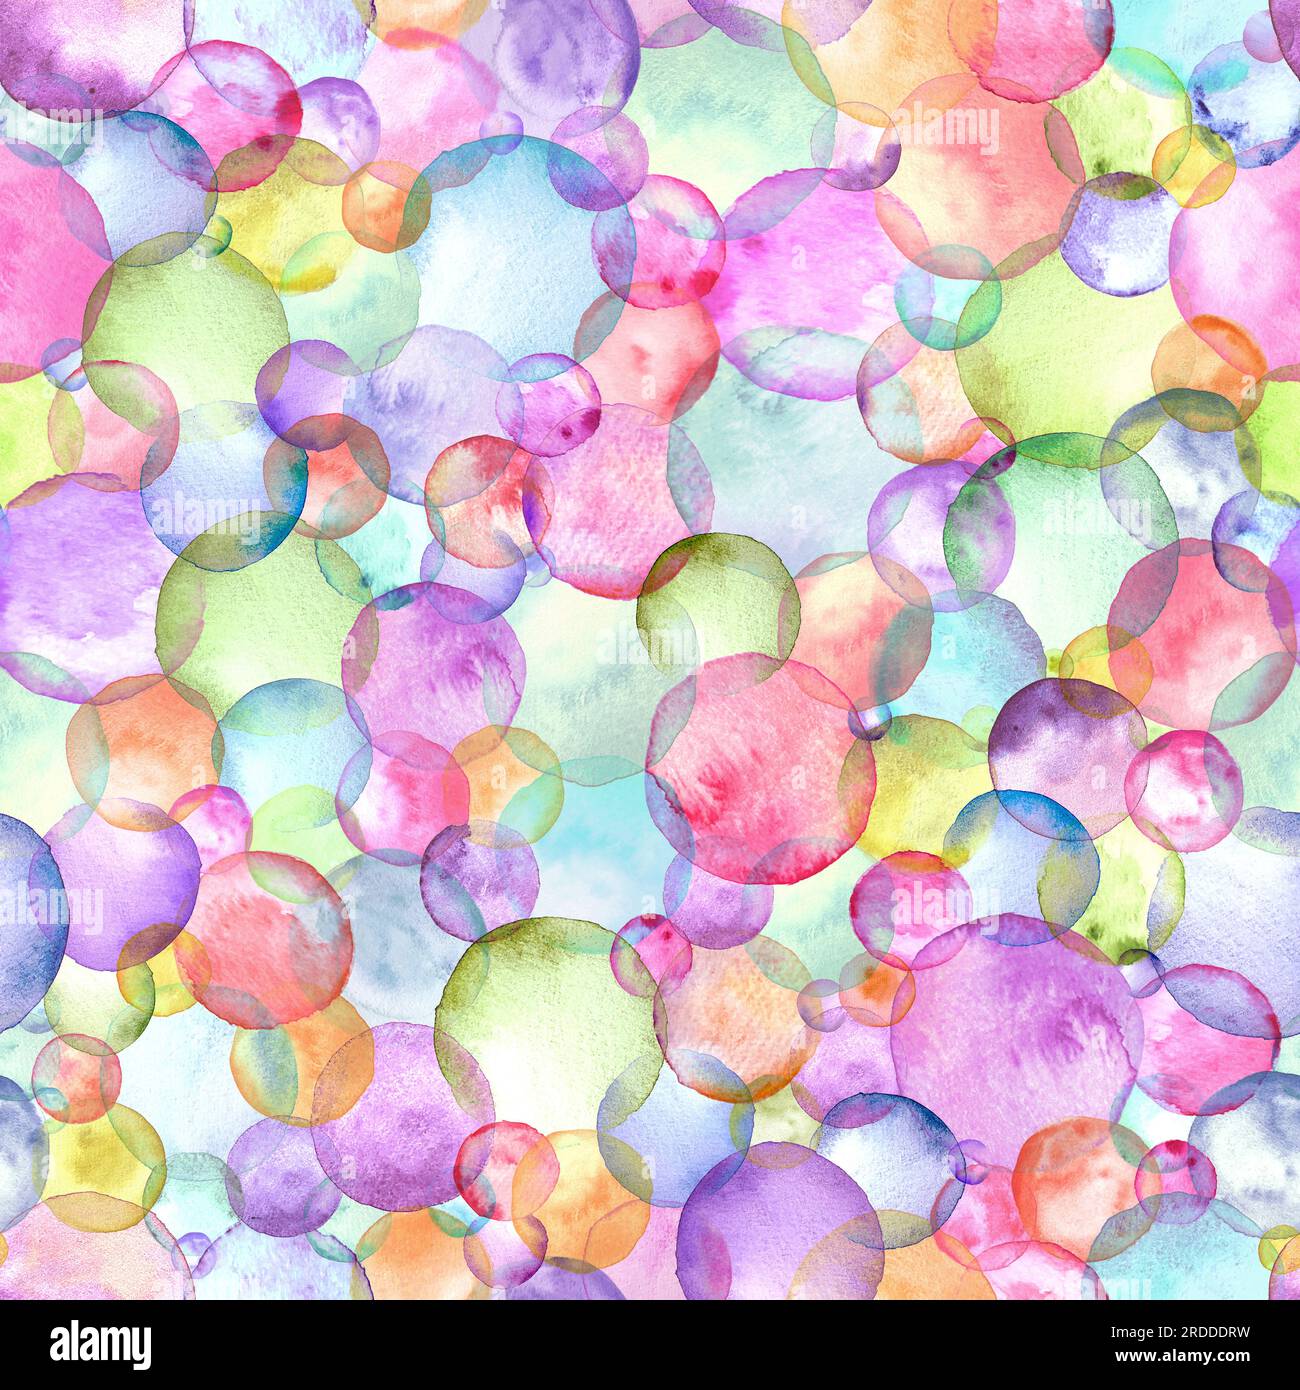 Abstract watercolor bubbles birthday party background. Hand drawn multicolor geometric shapes circles seamless pattern. Watercolour texture. Print for Stock Photo